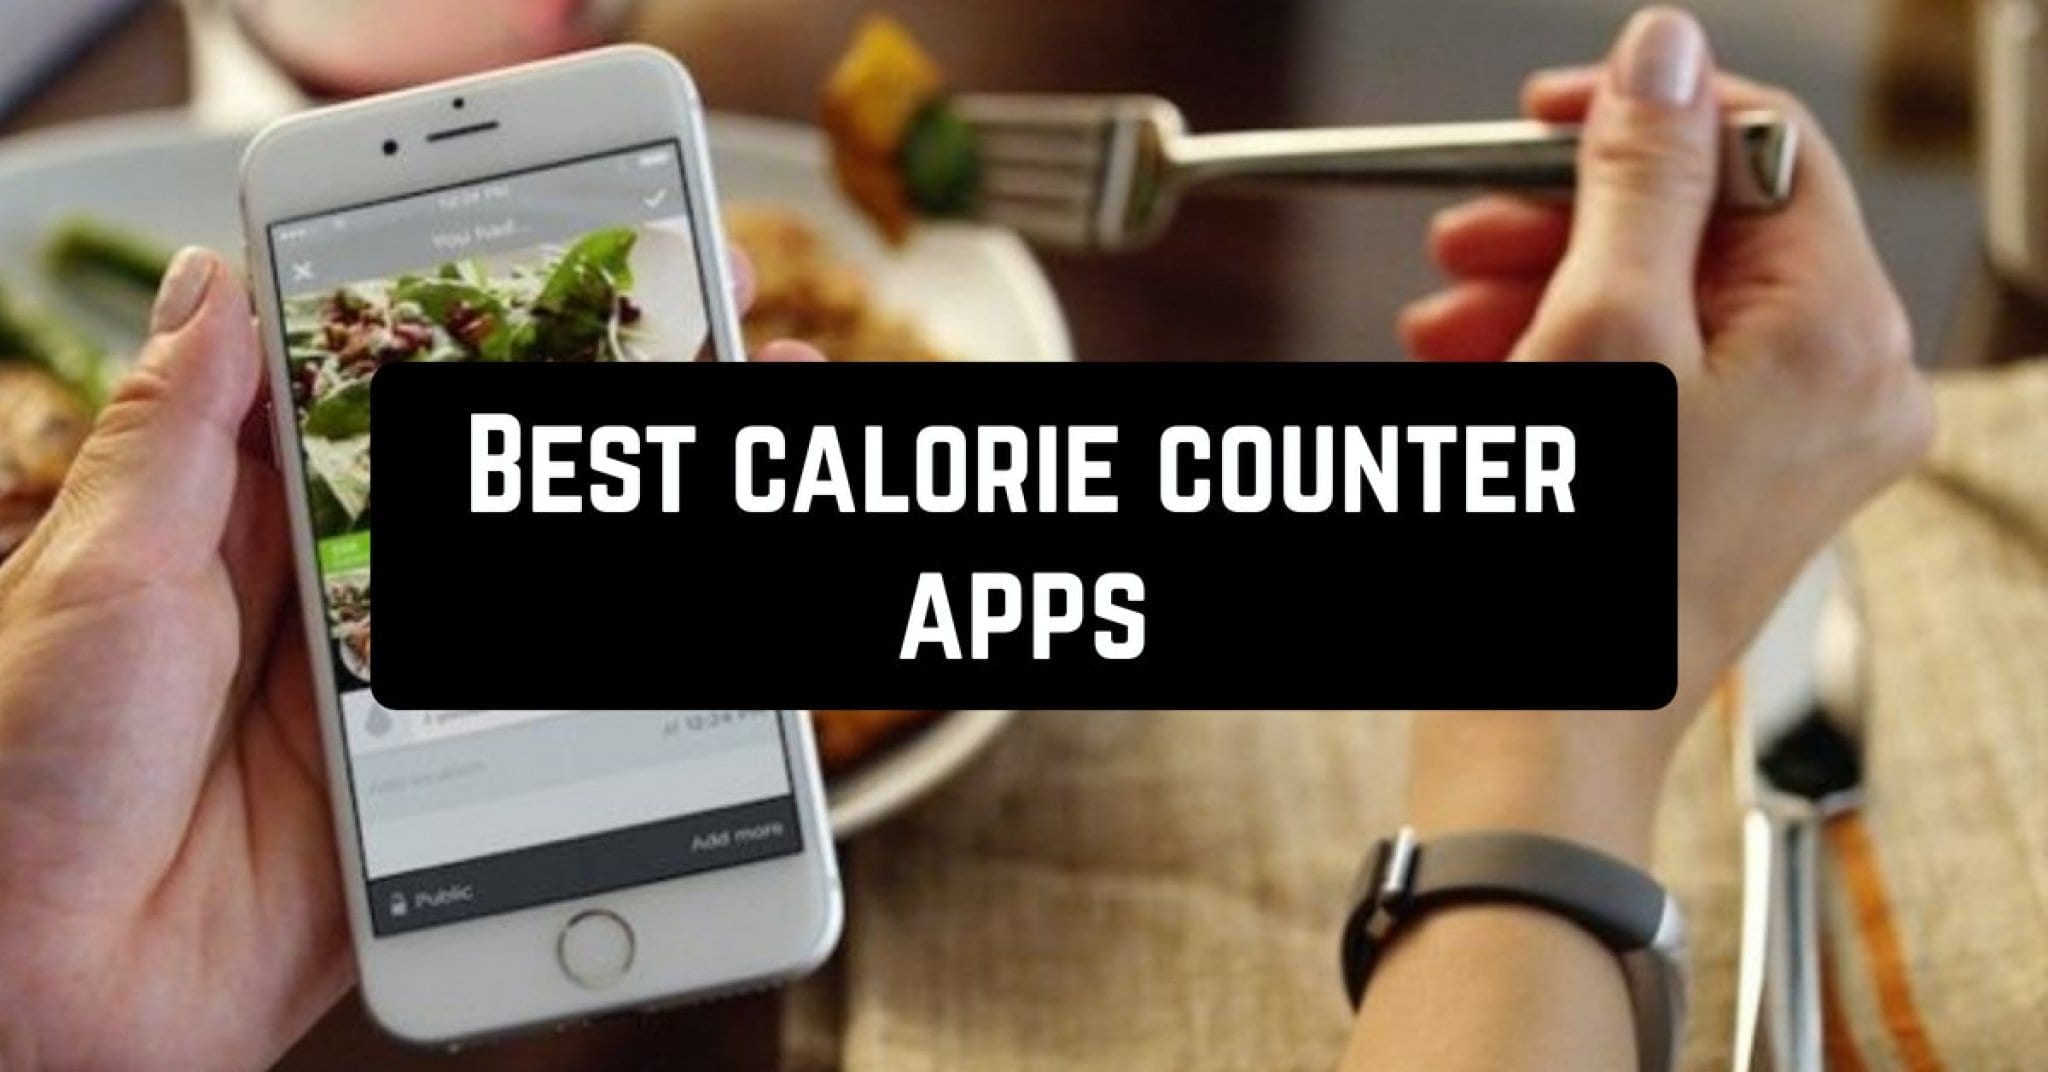 11 Best calorie counter apps for Android & iOS | Free apps for Android